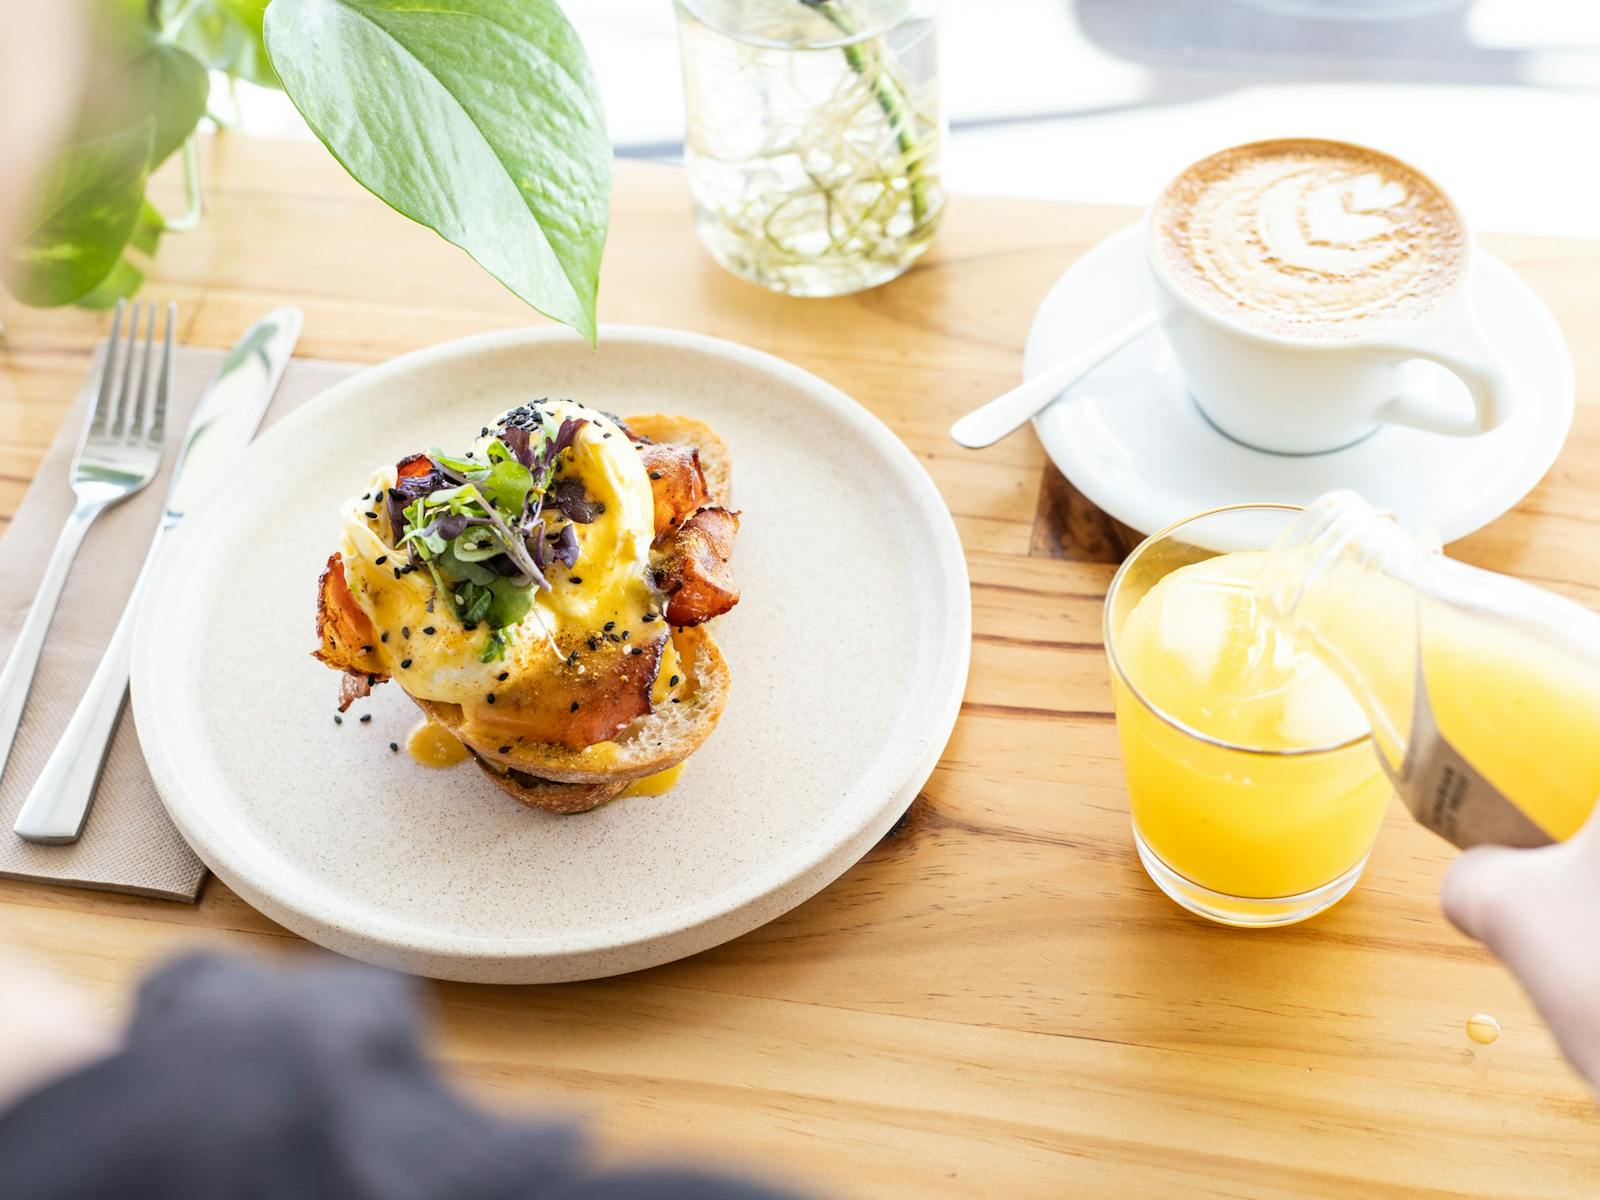 An eggs benedict served on a cream plate with a flat white and a glass of cold-pressed orange juice